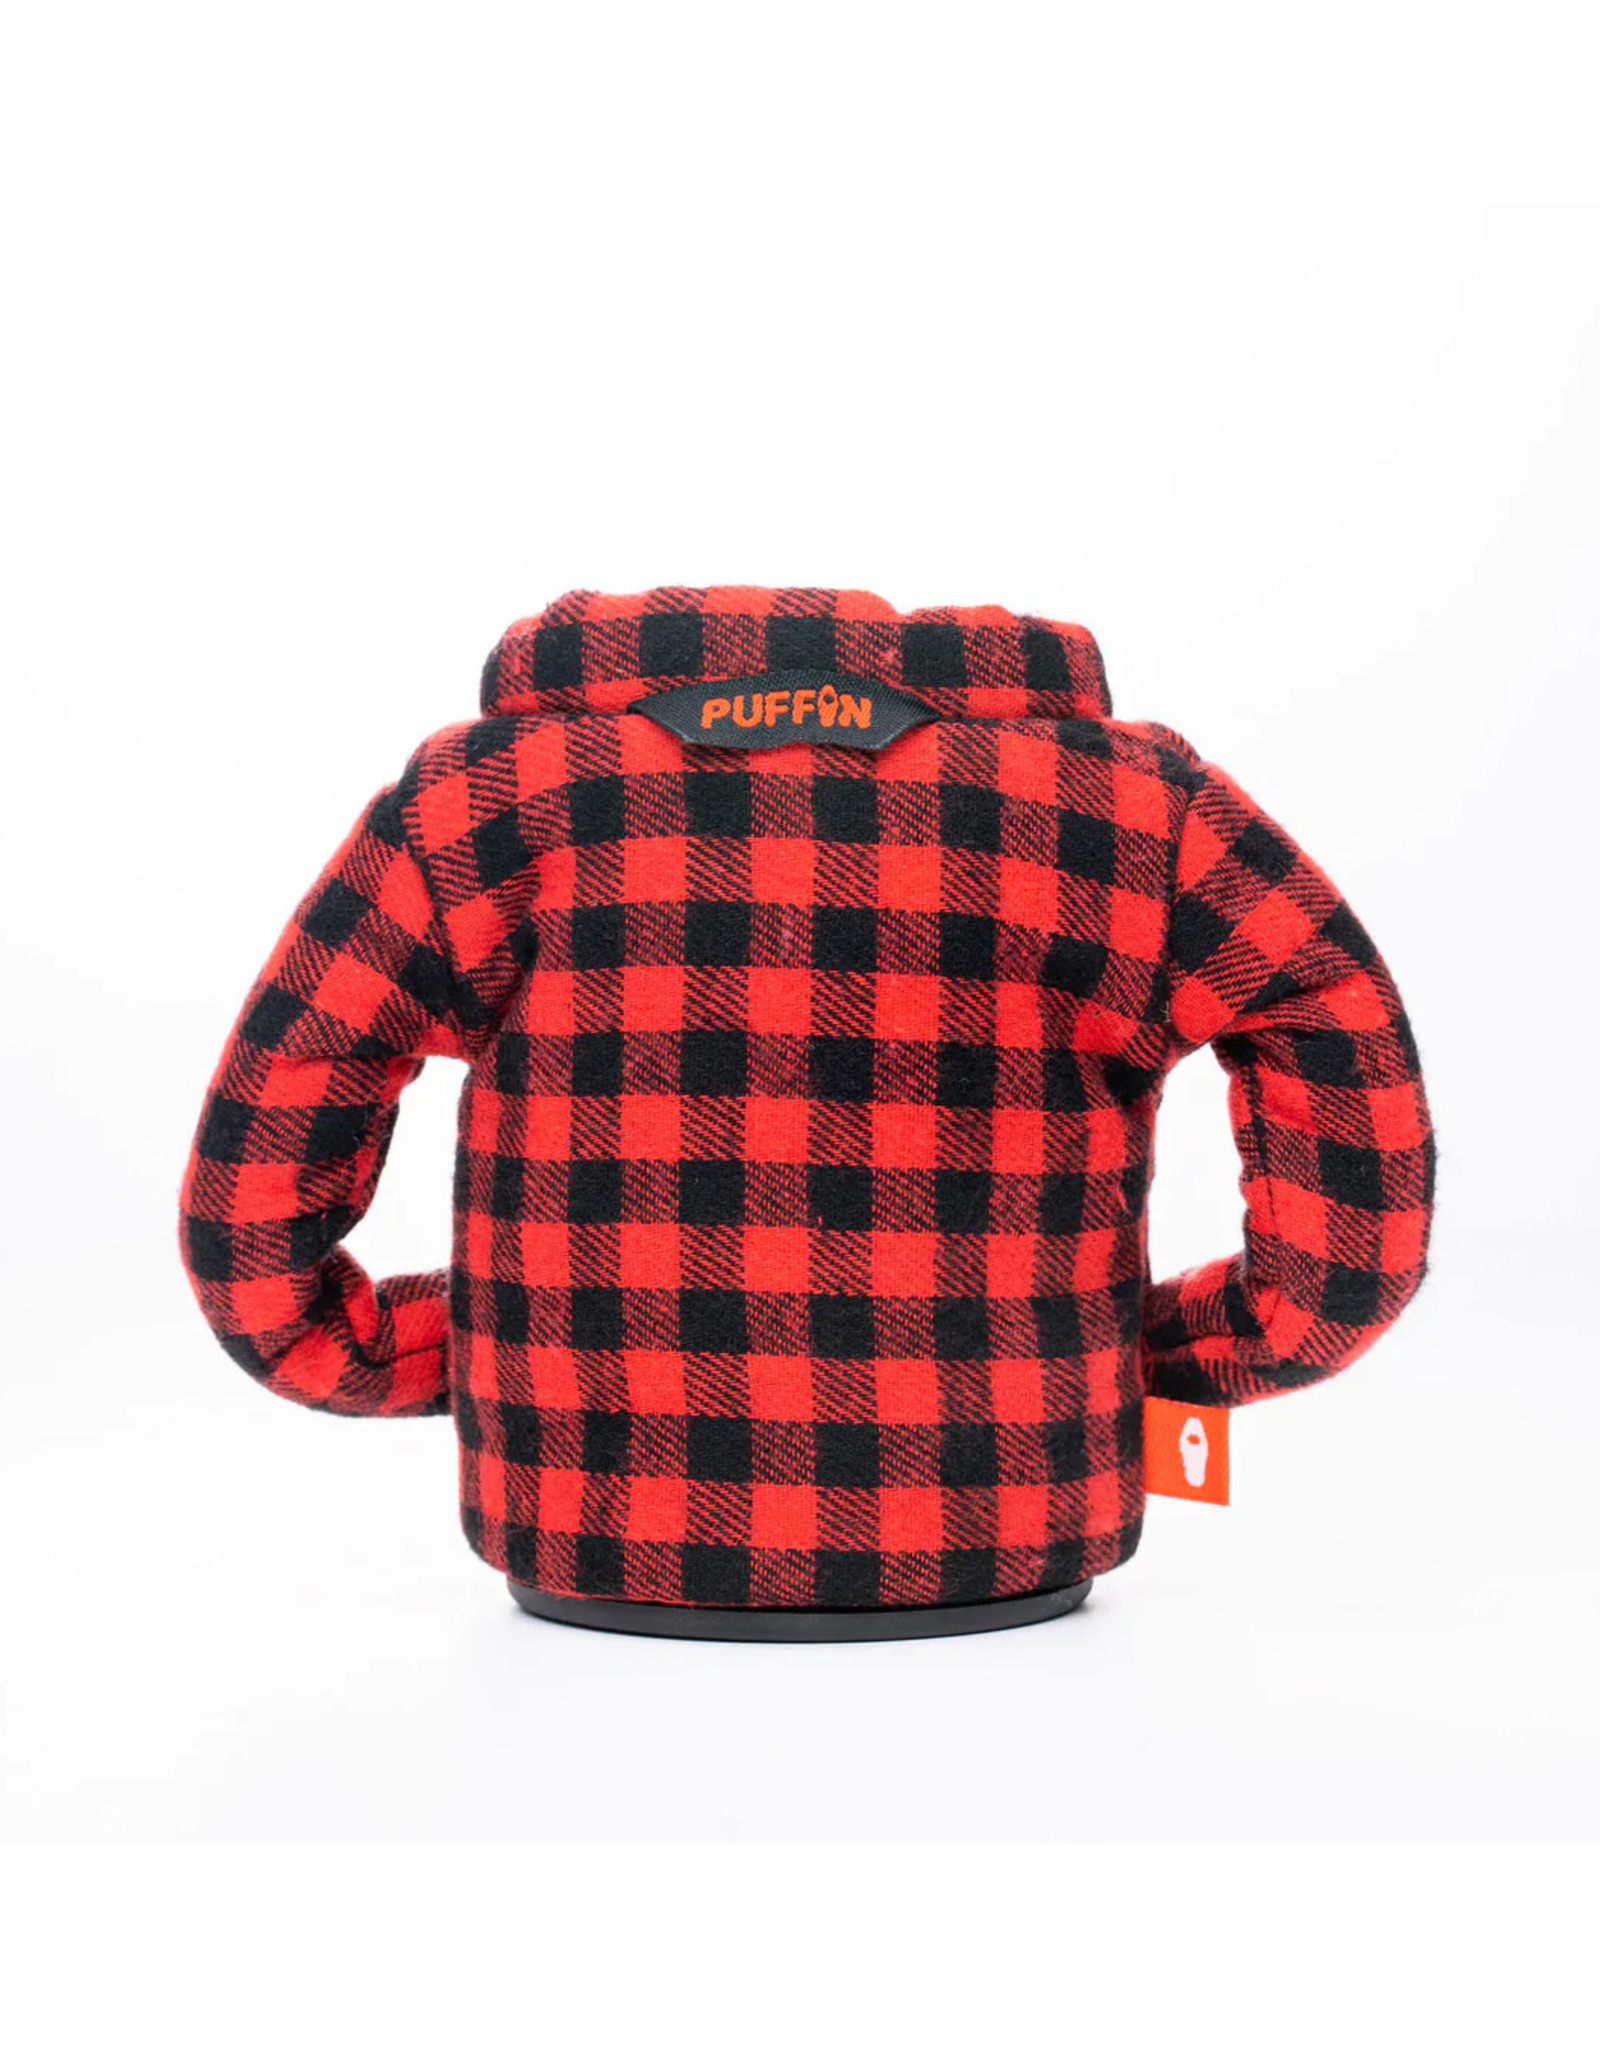 Puffin The Lumberjack - Red